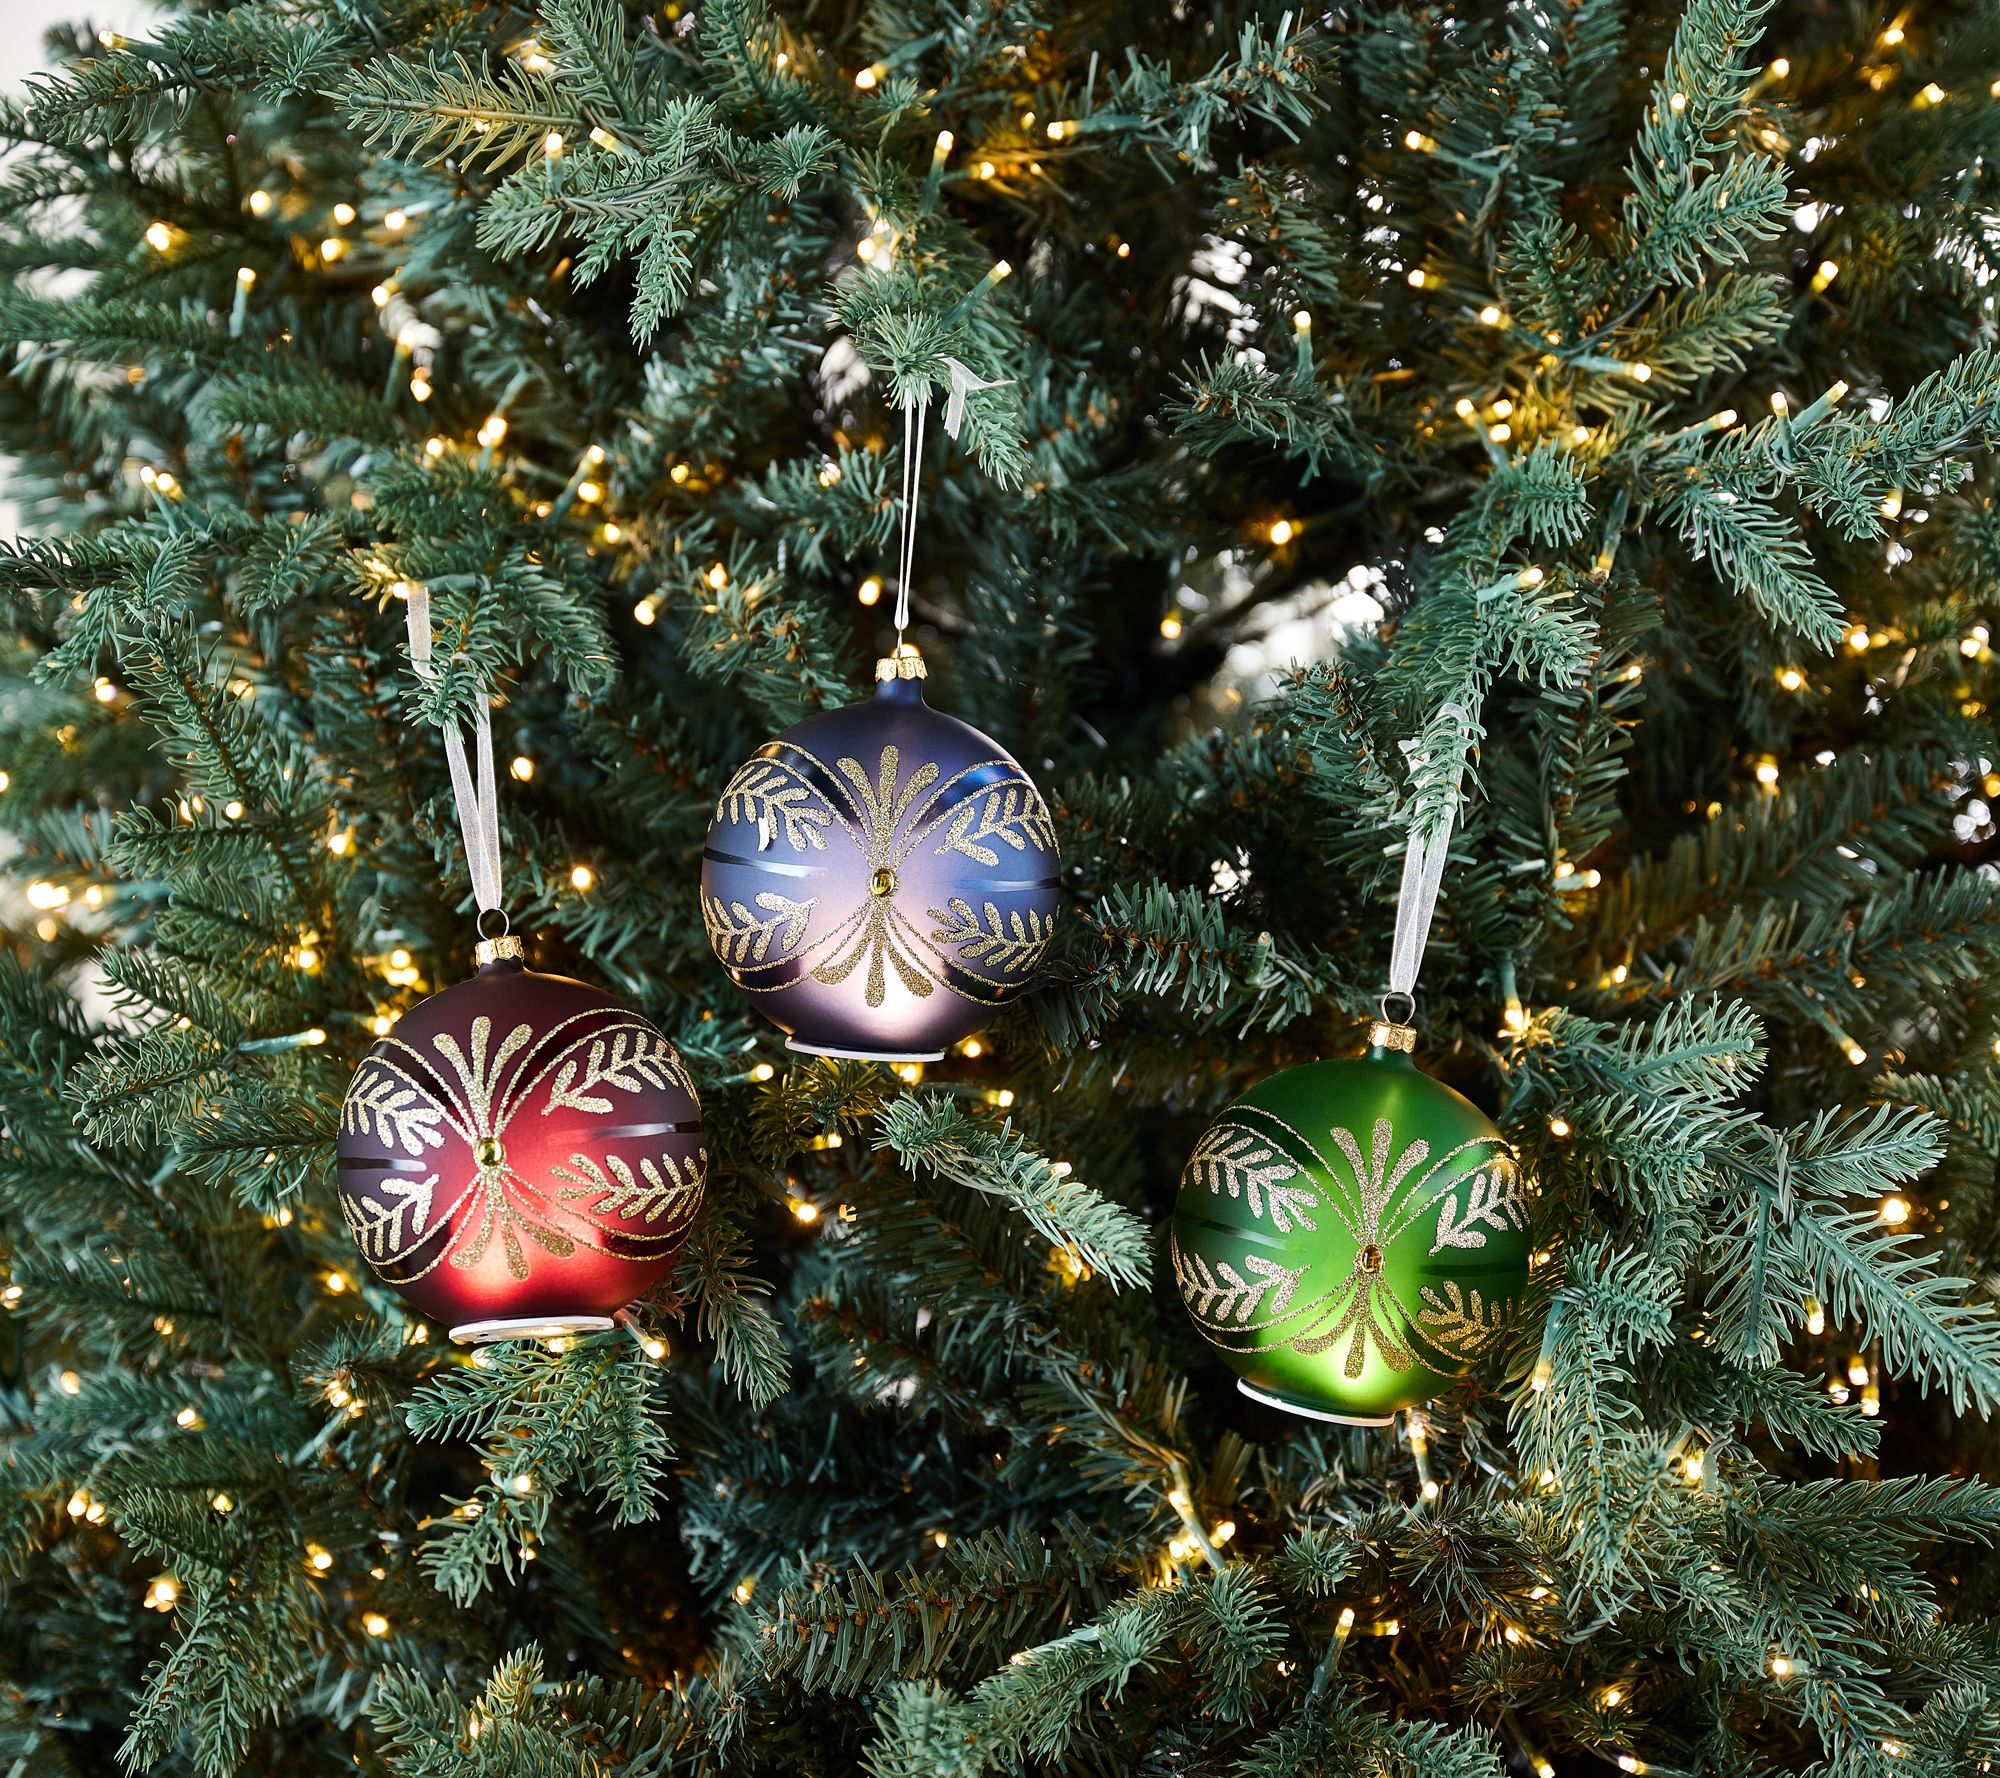 Set of 4 Painted Wooden Ball and Finial Ornaments by Lauren McBride